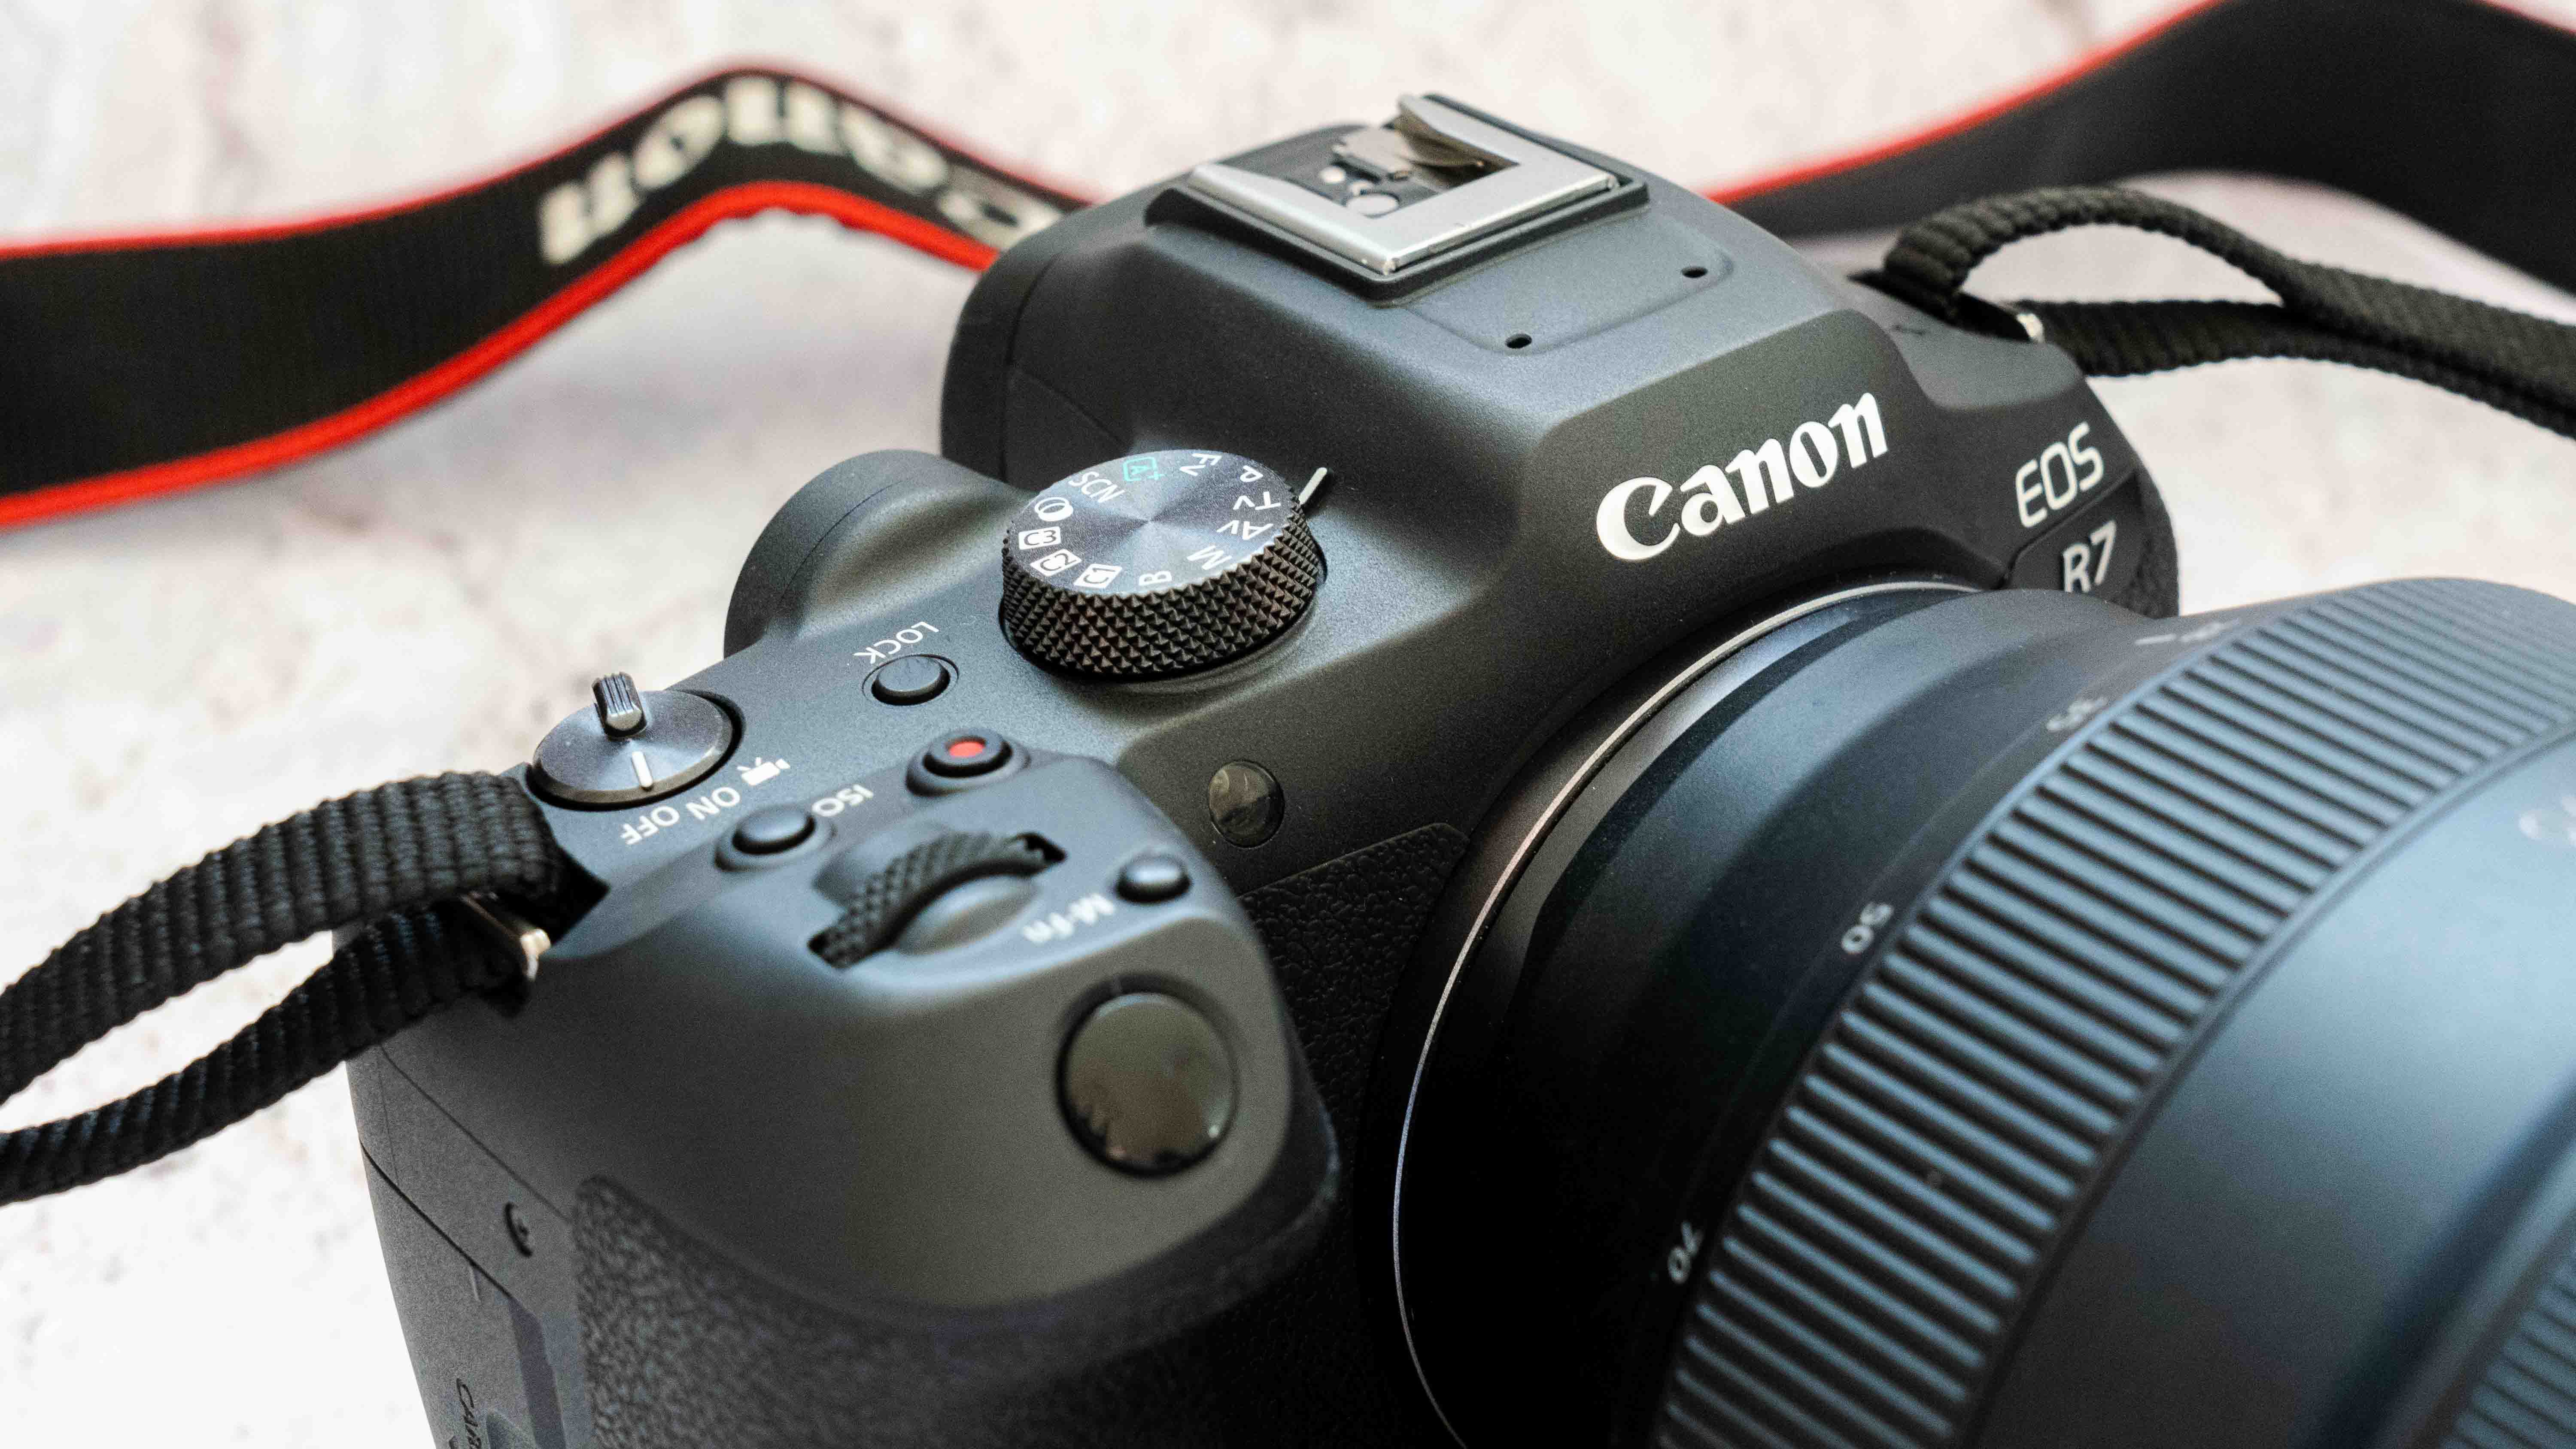 Canon EOS R7 Review | Space